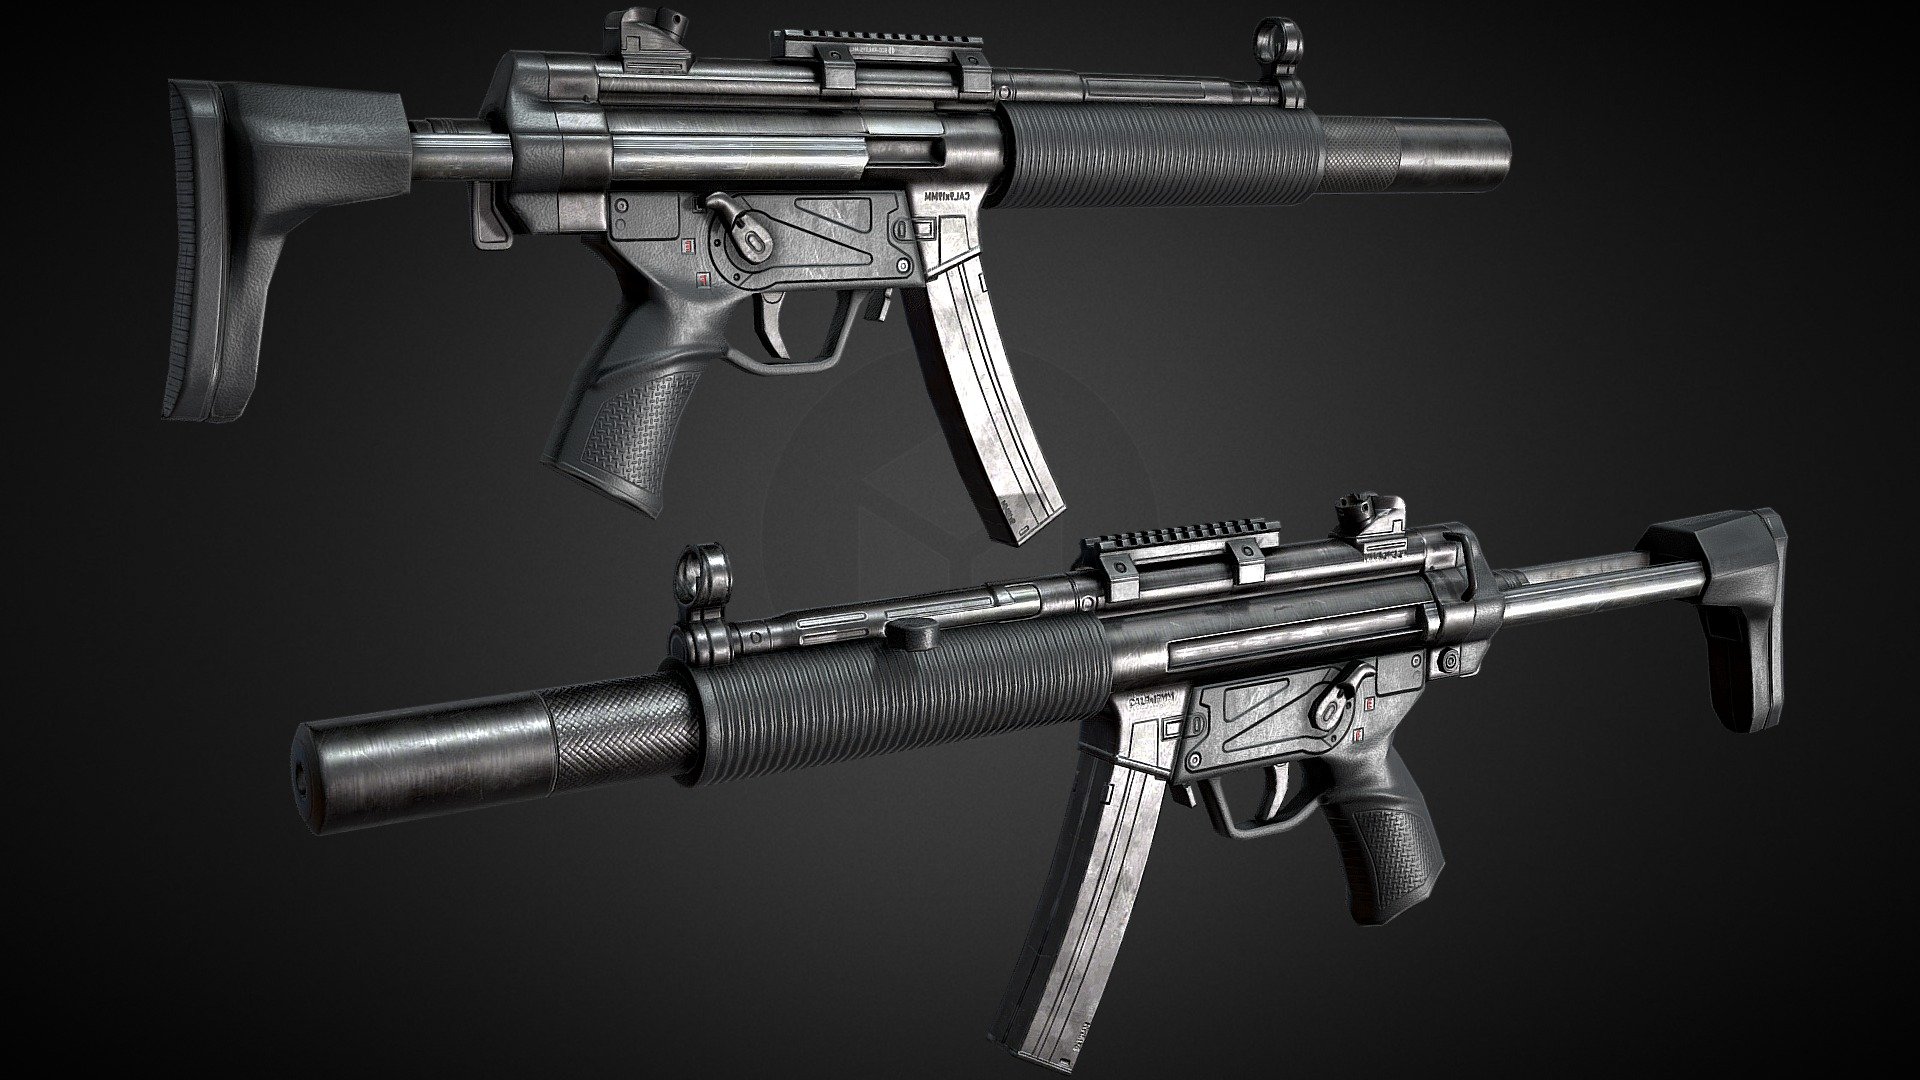 The MP5SD Optimized for mobile/Standalone VR applications with a polycount of 2499Tris

The version to the right has a single 1024x1024 texture while the Left is the 4096x4096 Version. The 1024x1024 version suffers a little bit due to sketchfab texture compression but should look cleaner in your target engine if compression quality is set to high or none.

For correct rotations in Unity engine you might need to tick the “Bake axis conversion” import option when importing the FBX.

An additional 128x128 texture set is used for the 9x19mm Bullets inside the weapon on the right version while the left one uses a 1024x1024 texture for the bullet 3d model